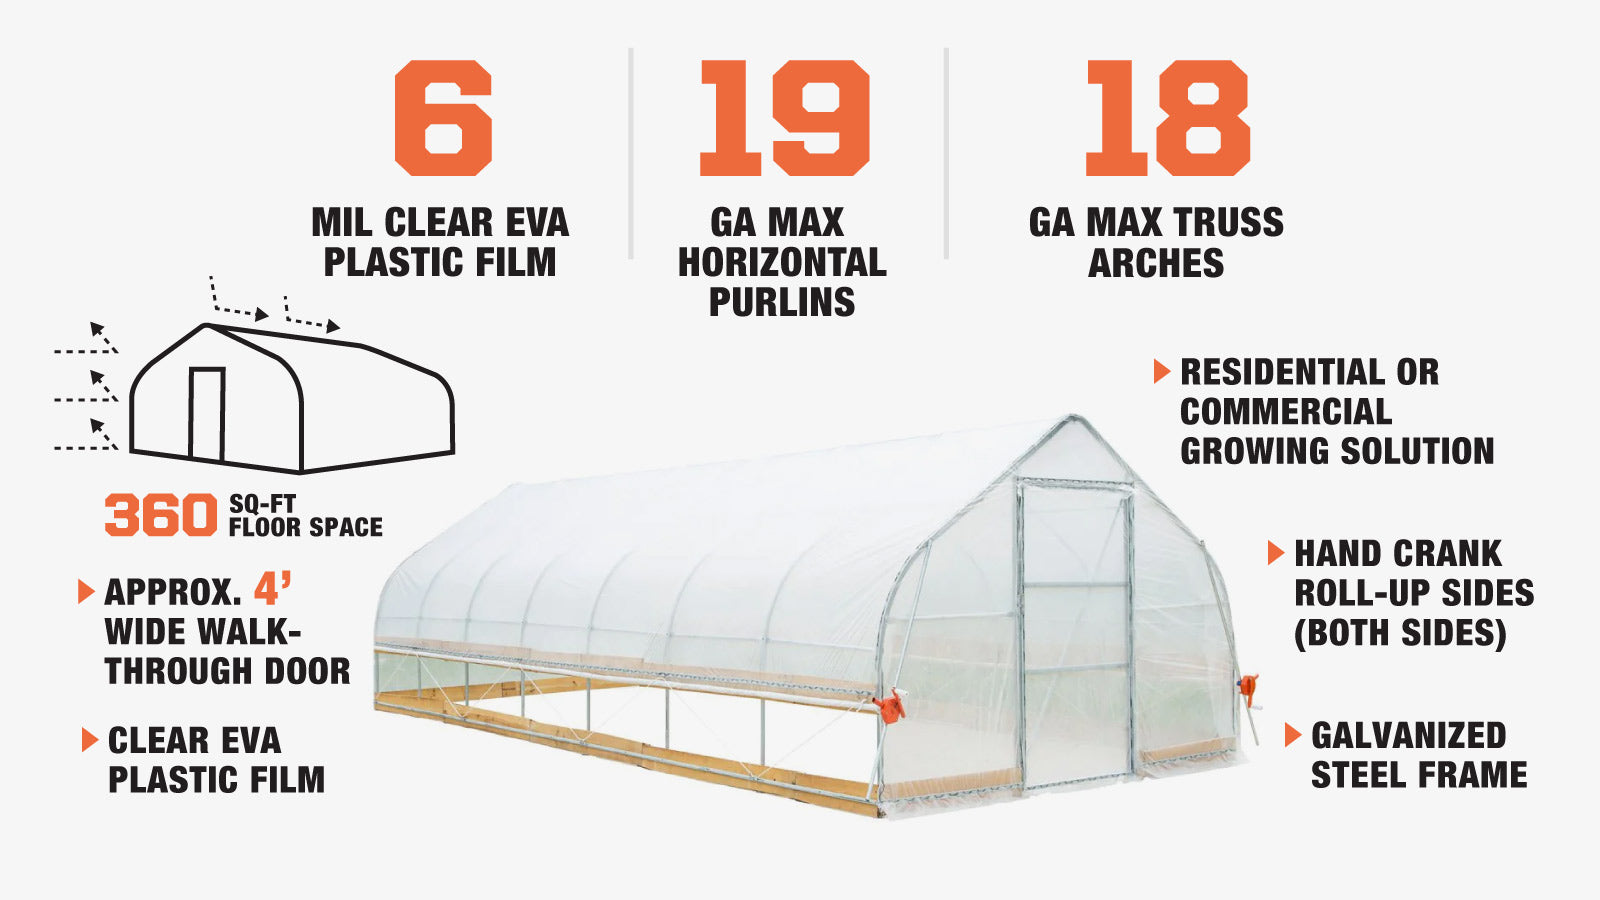 TMG Industrial 12’ x 30’ Tunnel Greenhouse Grow Tent w/6 Mil Clear EVA Plastic Film, Cold Frame, Hand Crank Roll-Up Sides, Peak Ceiling Roof, TMG-GH1230-description-image